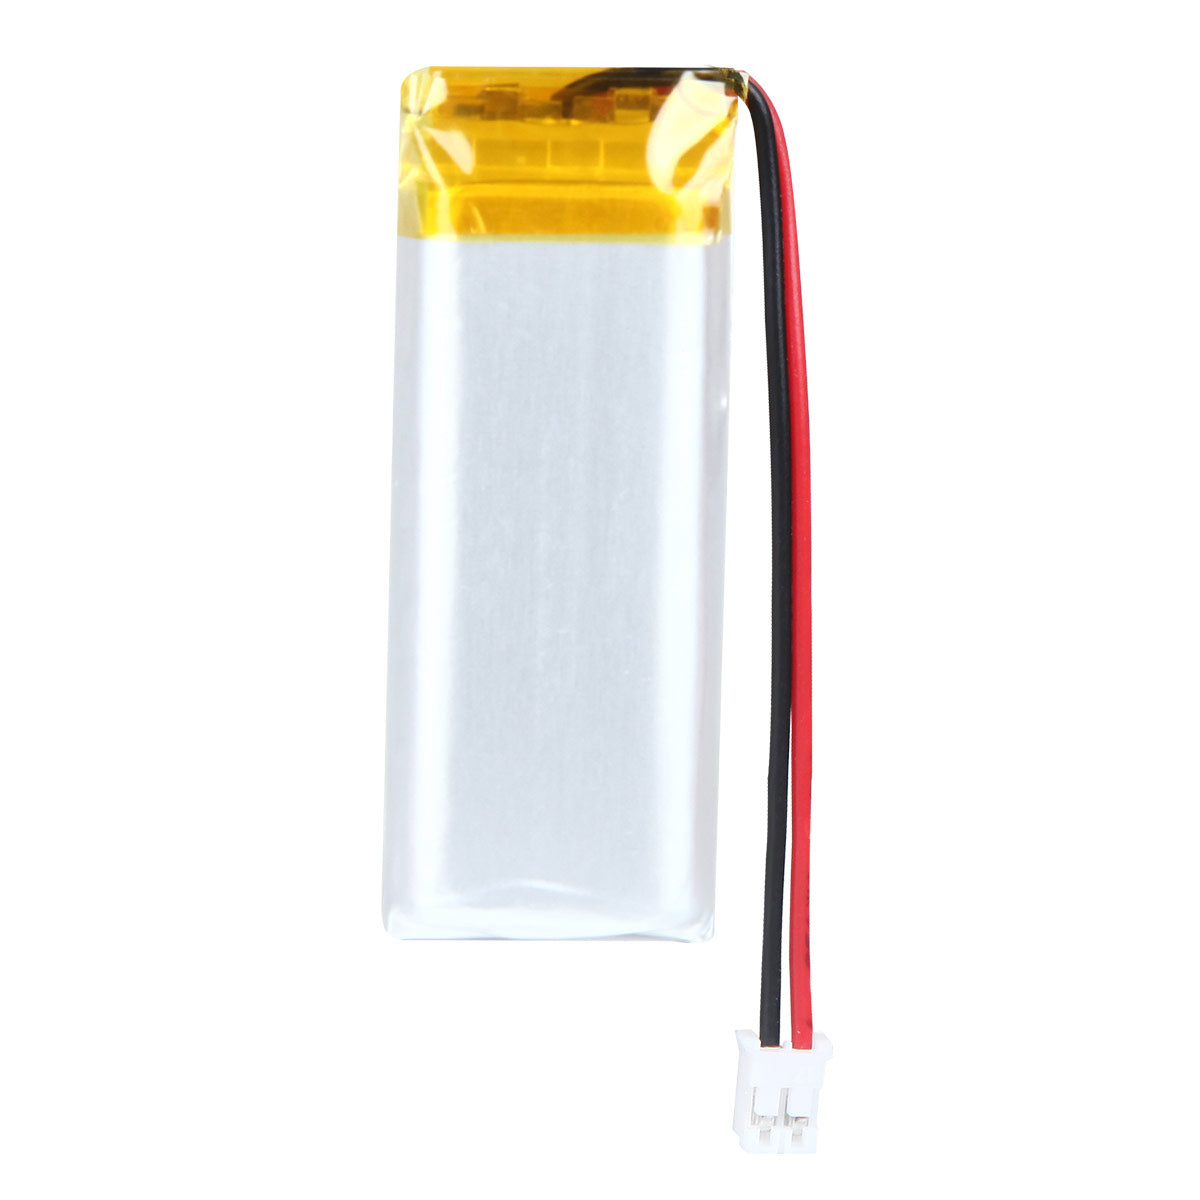 YDL 3.7V 750mAh 782248 Rechargeable Lithium Polymer Battery